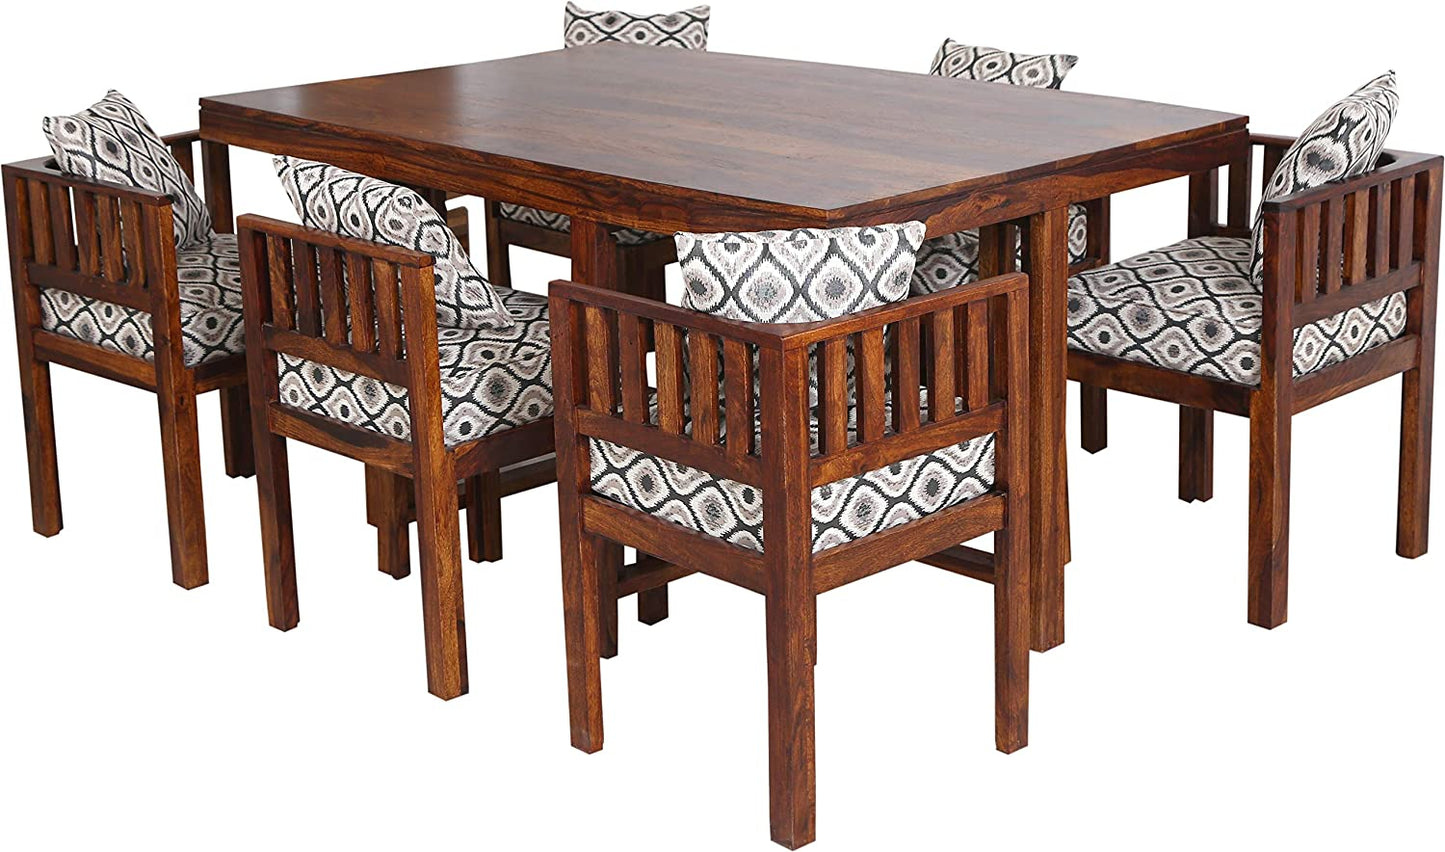 MoonWooden Solid Wood 6 Seater Dining Table Set with 6 Chair for Home & Office Furniture| Hotel & Dinner | Drawing Room Furniture with Teak Finish